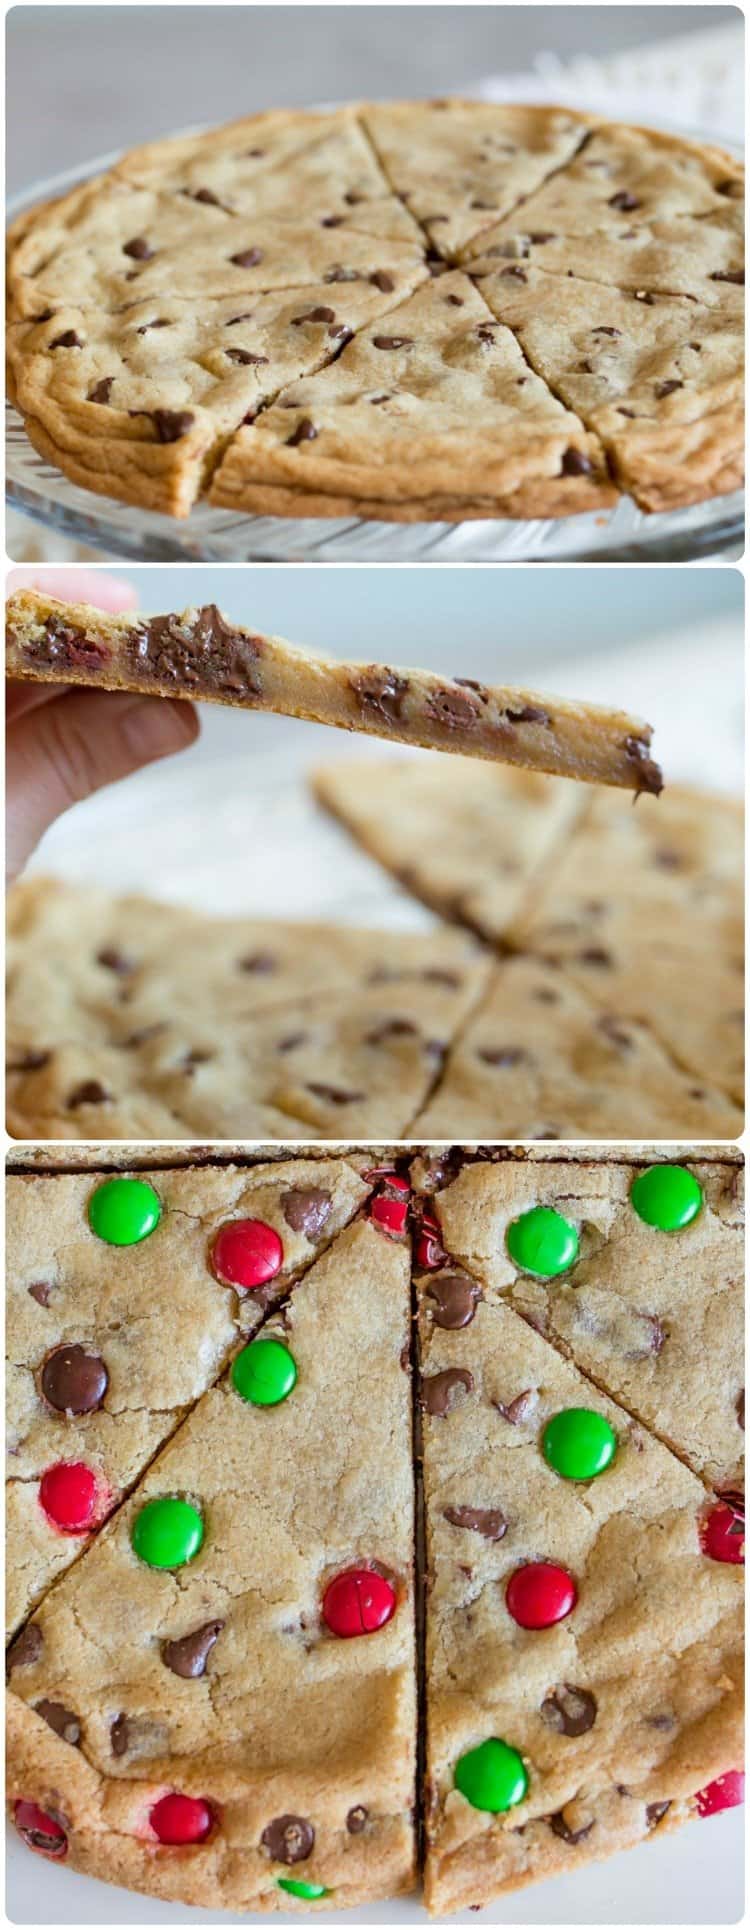 The most amazing cookie recipe you will ever find